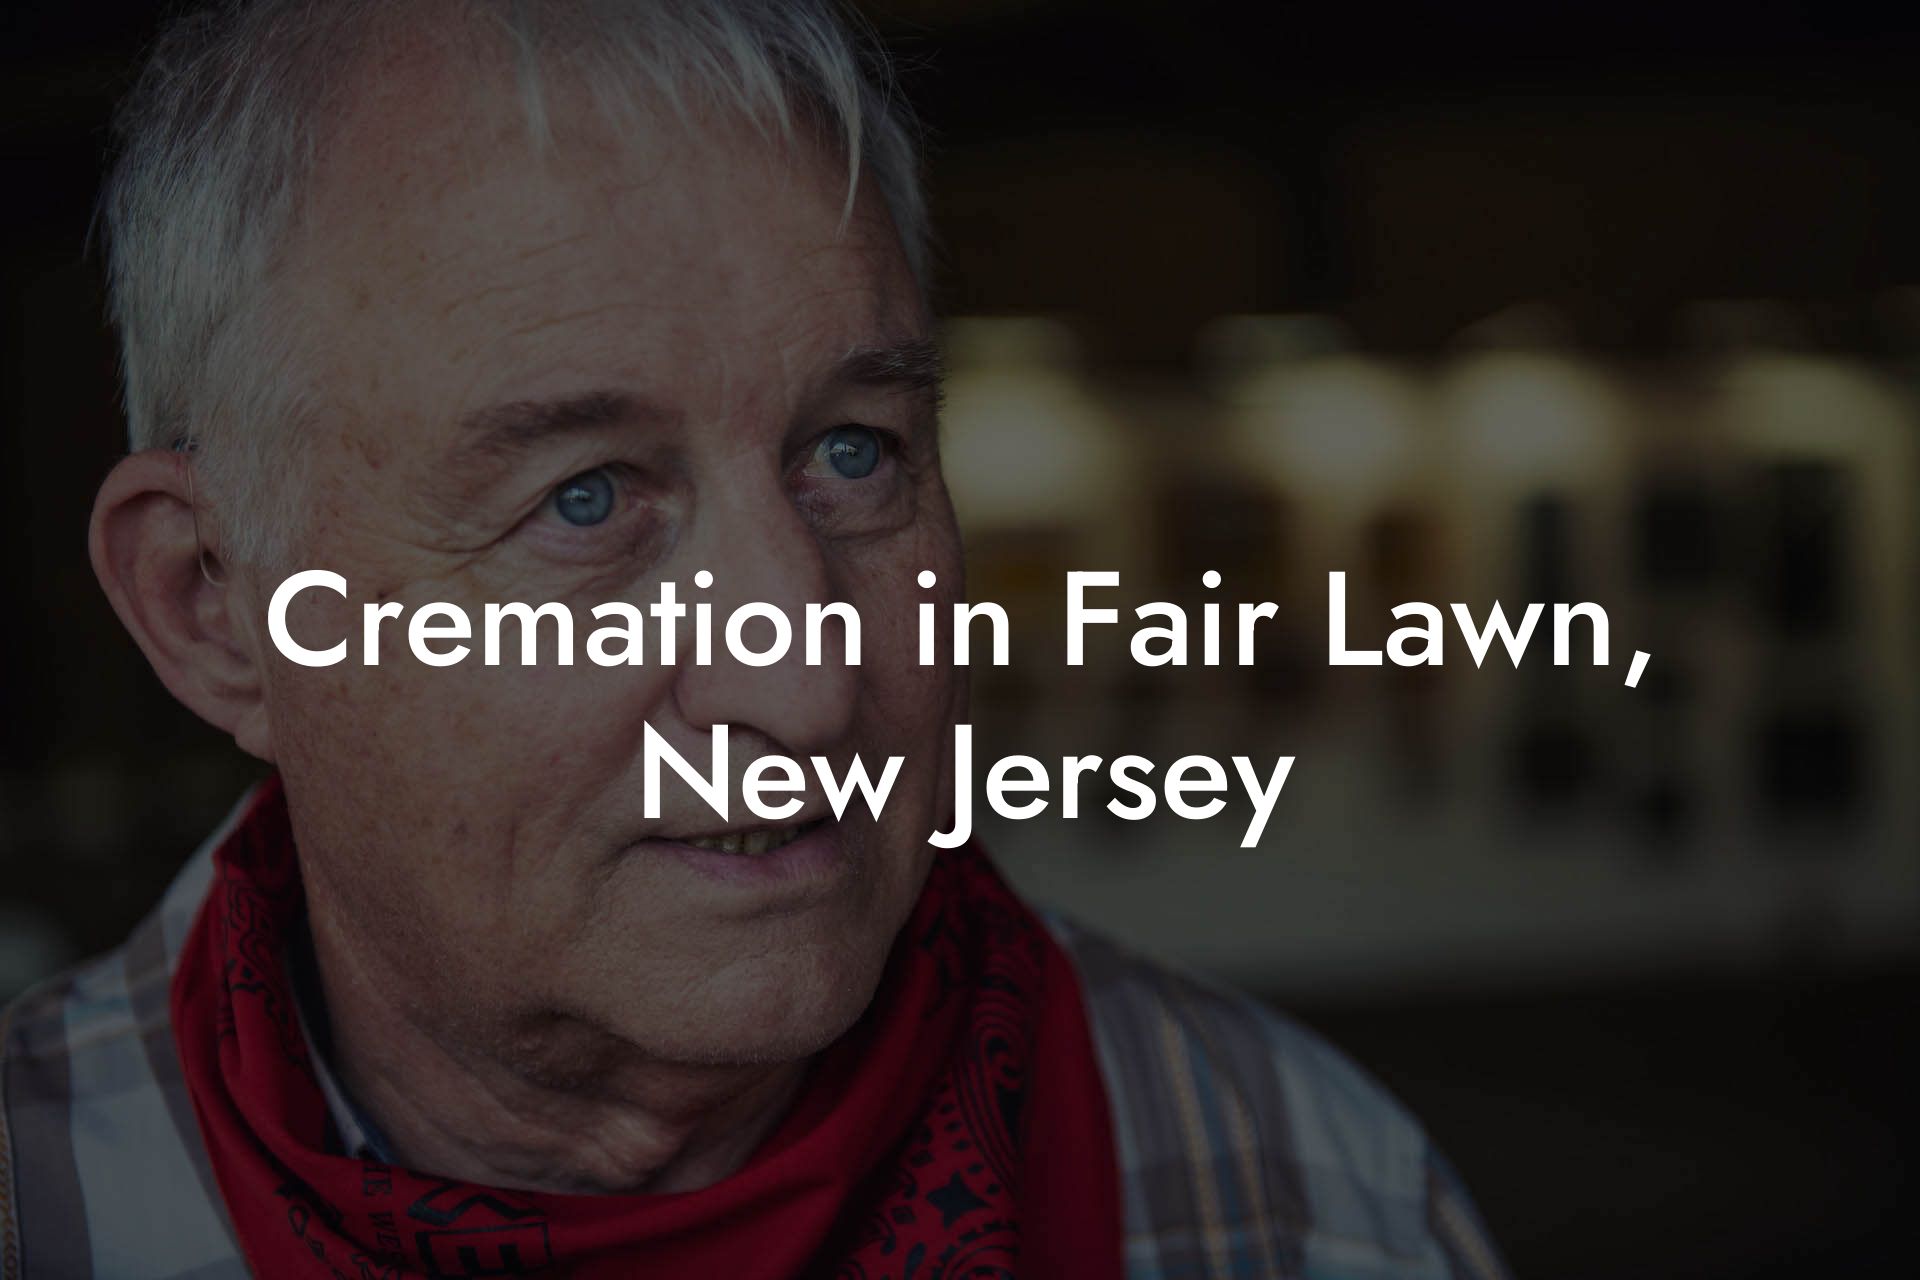 Cremation in Fair Lawn, New Jersey